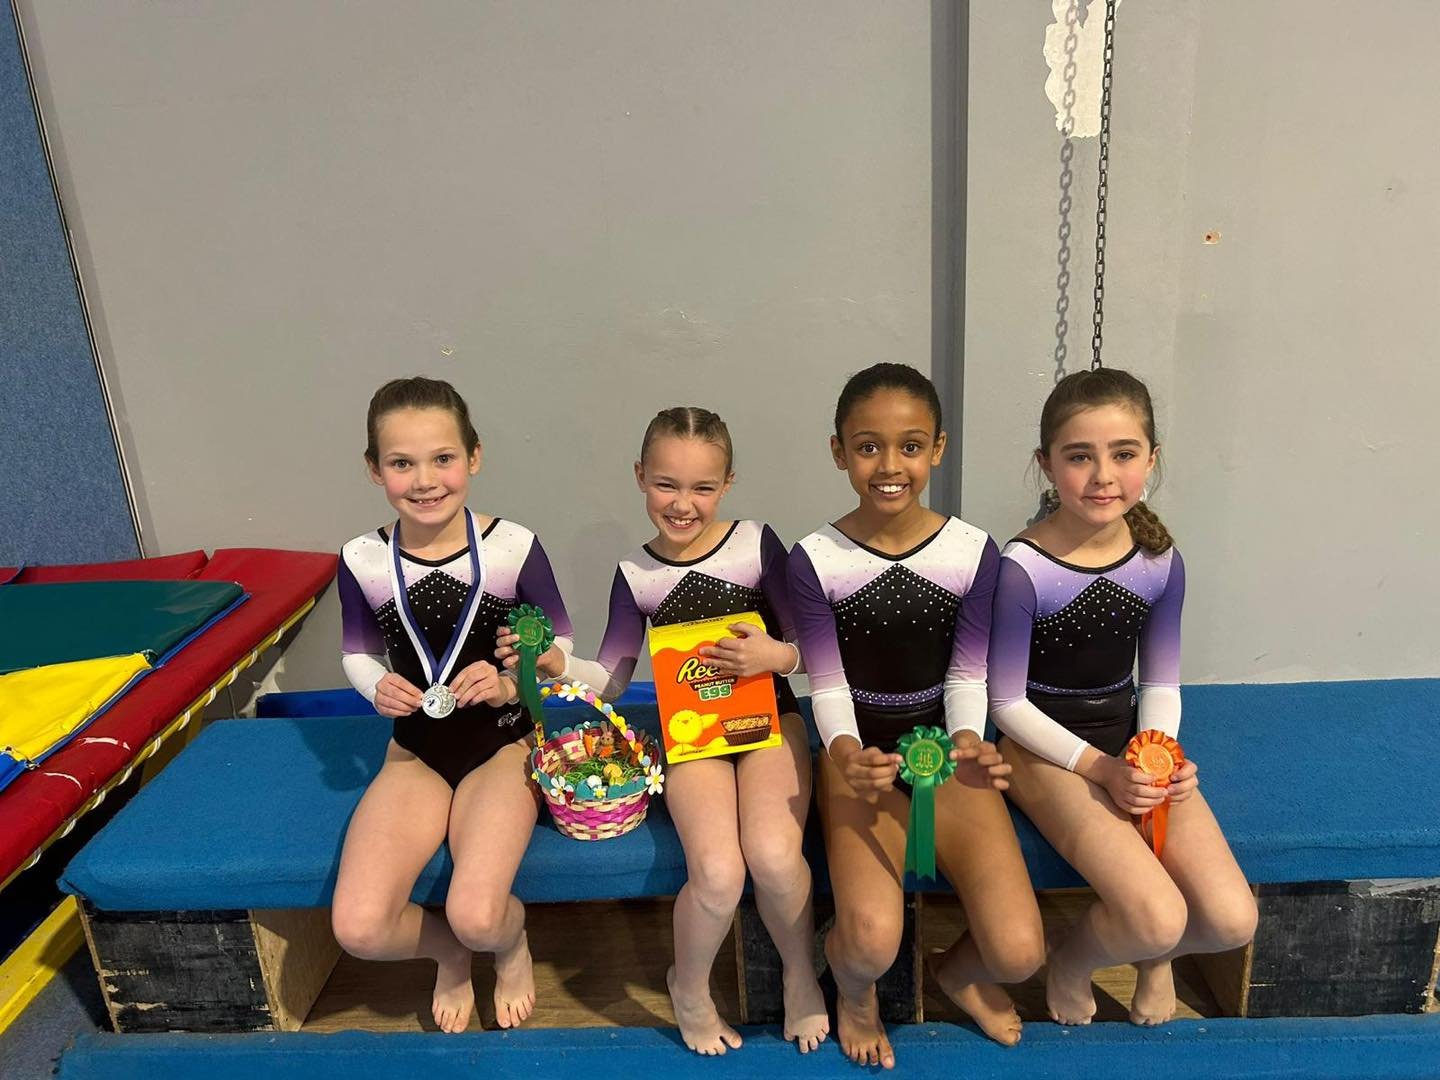 What a FANTASTIC day for DLJ Gymnastics Club! We have come home with outstanding results from the Pegasus Invitational today and we are so proud of you all! 🤩

6th place for Amelia
5th place for Agnes
1st place for Aubree and special floor award
2nd